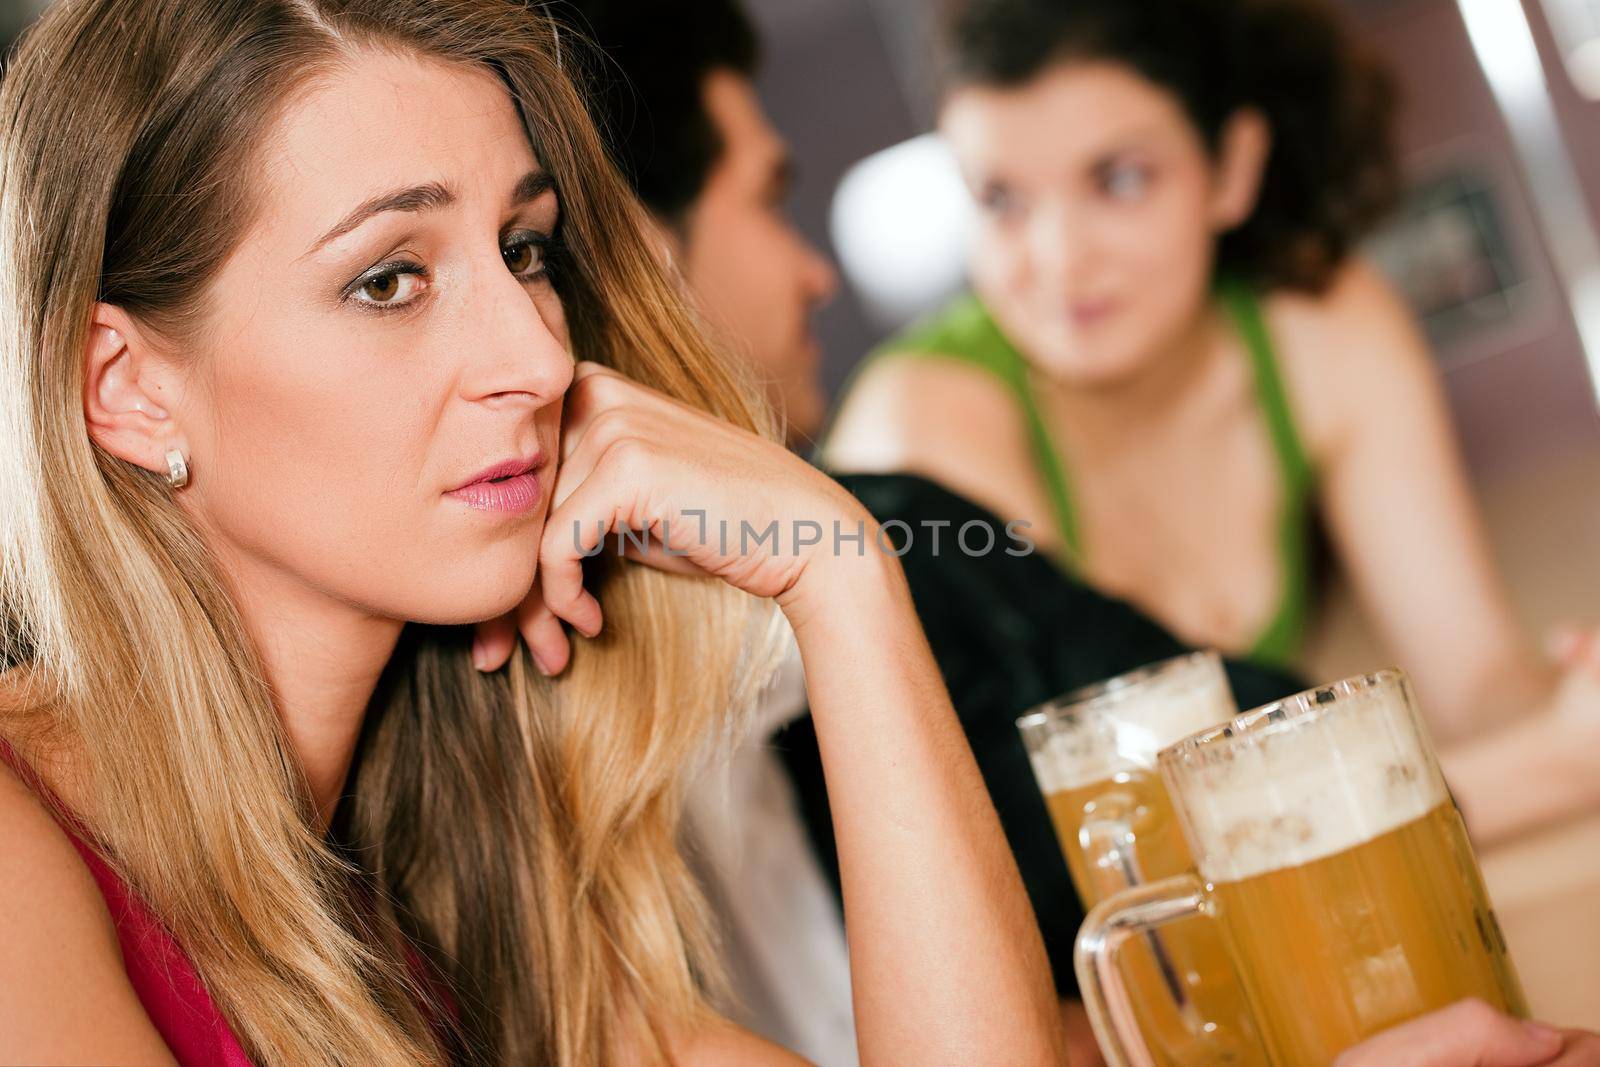 Group of people in a bar or restaurant drinking beer, woman in front being sad since her boyfriend is flirting with another girl dumping her